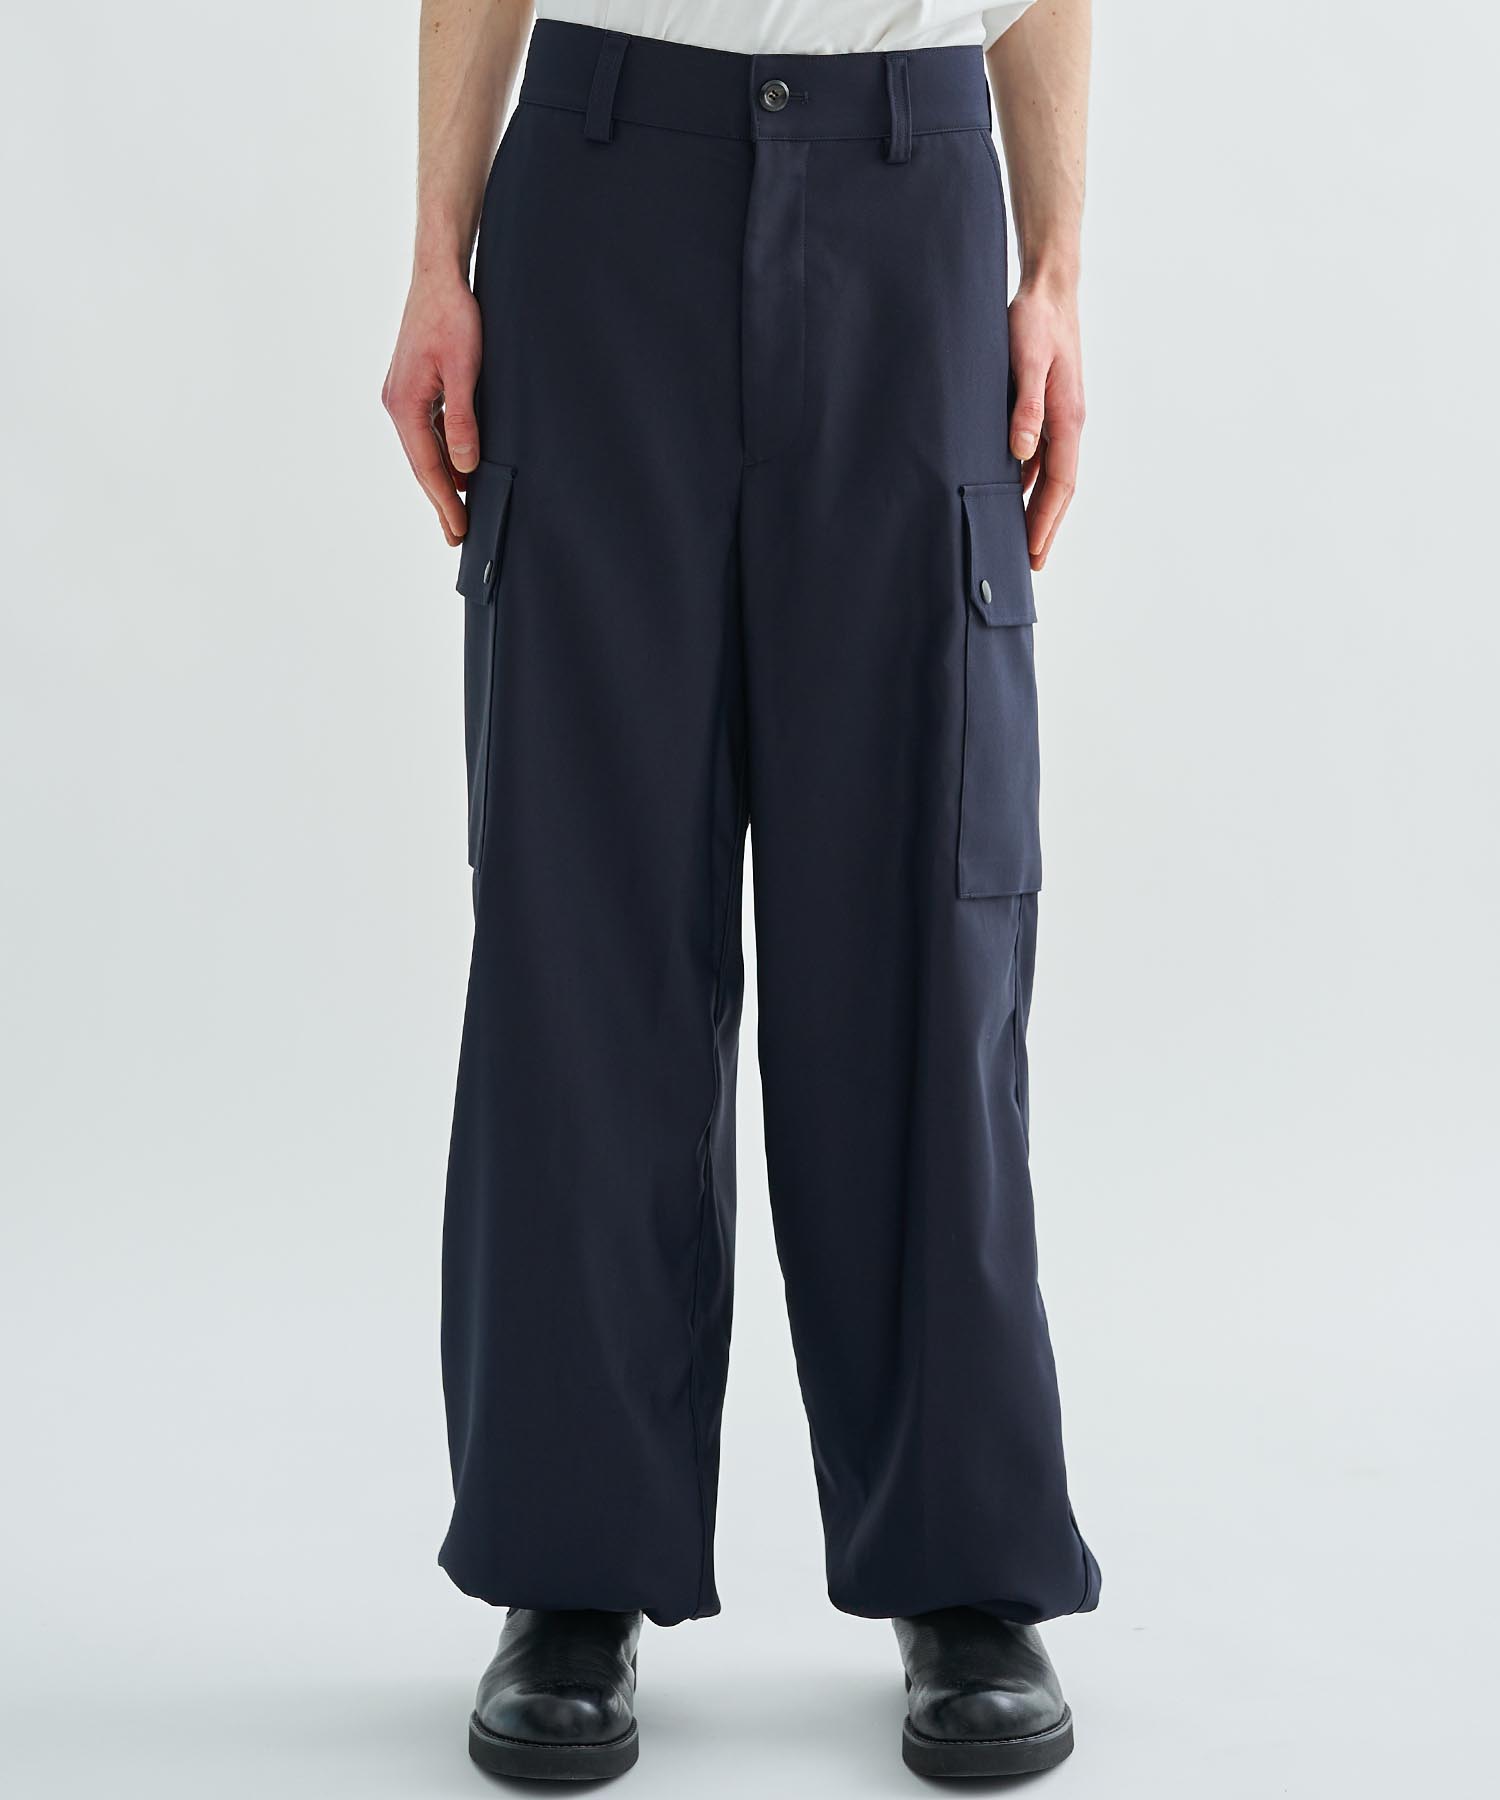 RERACS FRENCH ARMY F2 CARGO PANTS(46 NAVY): THE RERACS: MENS